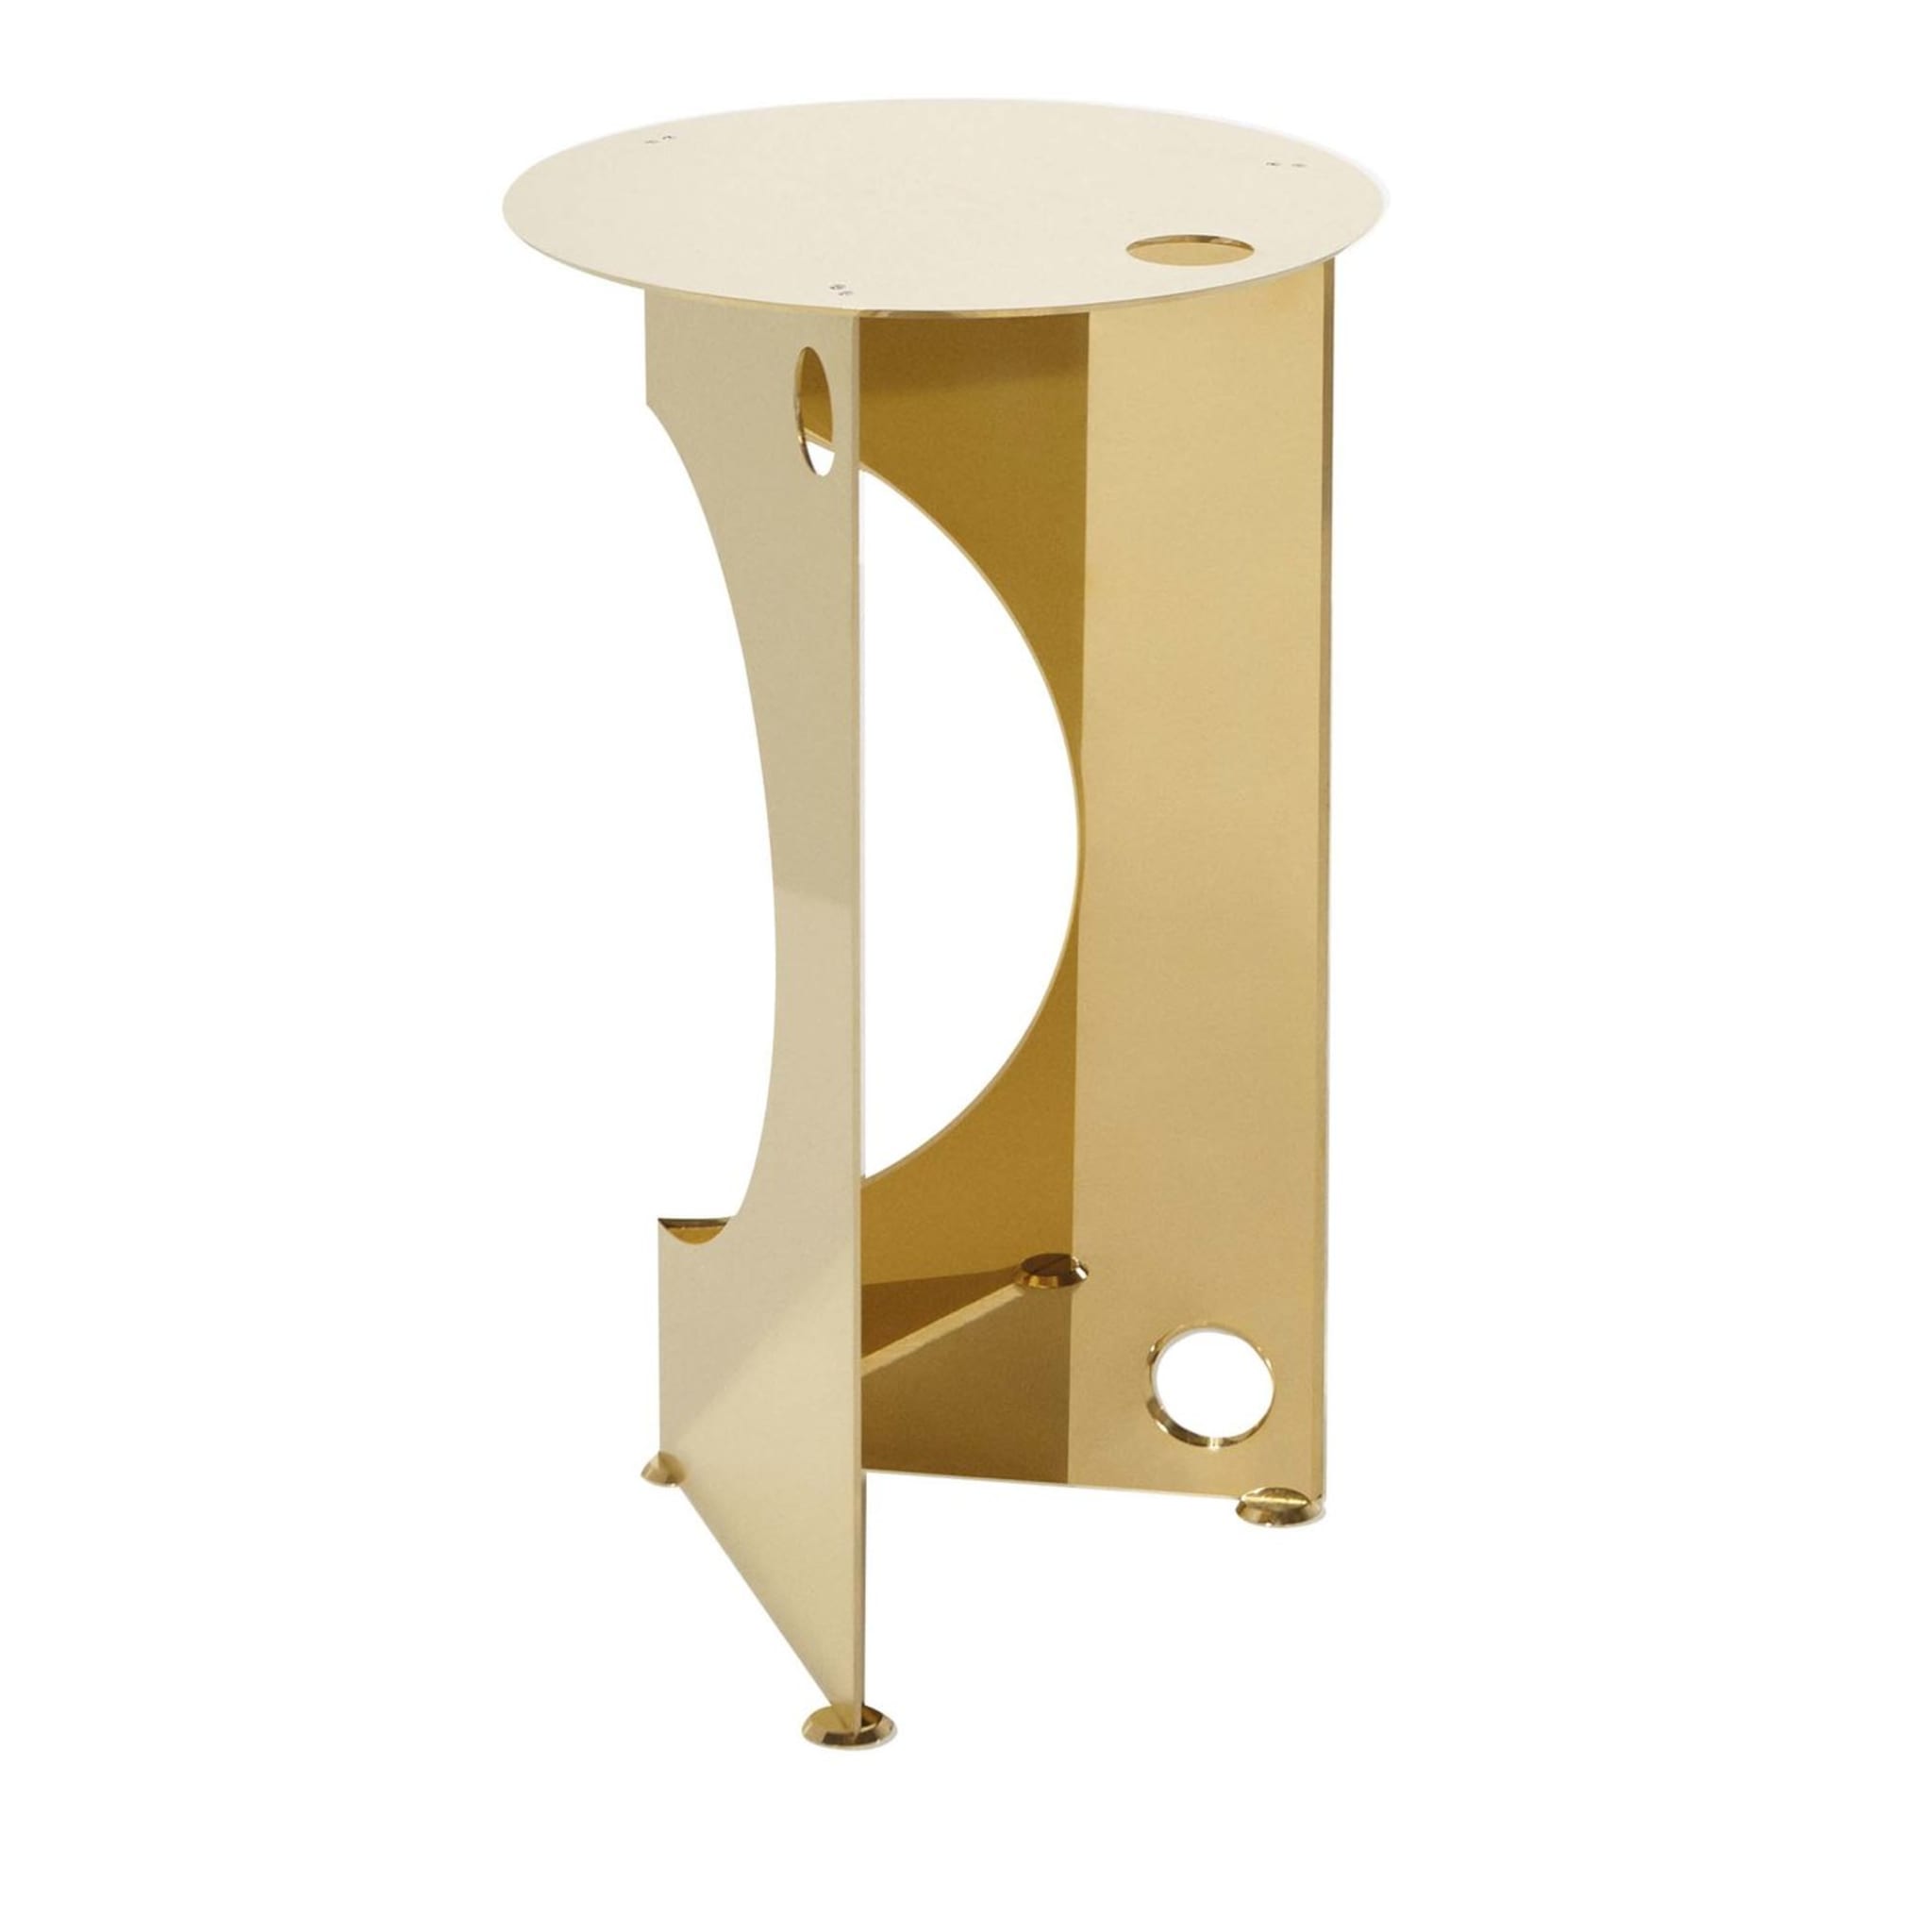 One Side Table in Polished Brass - Main view